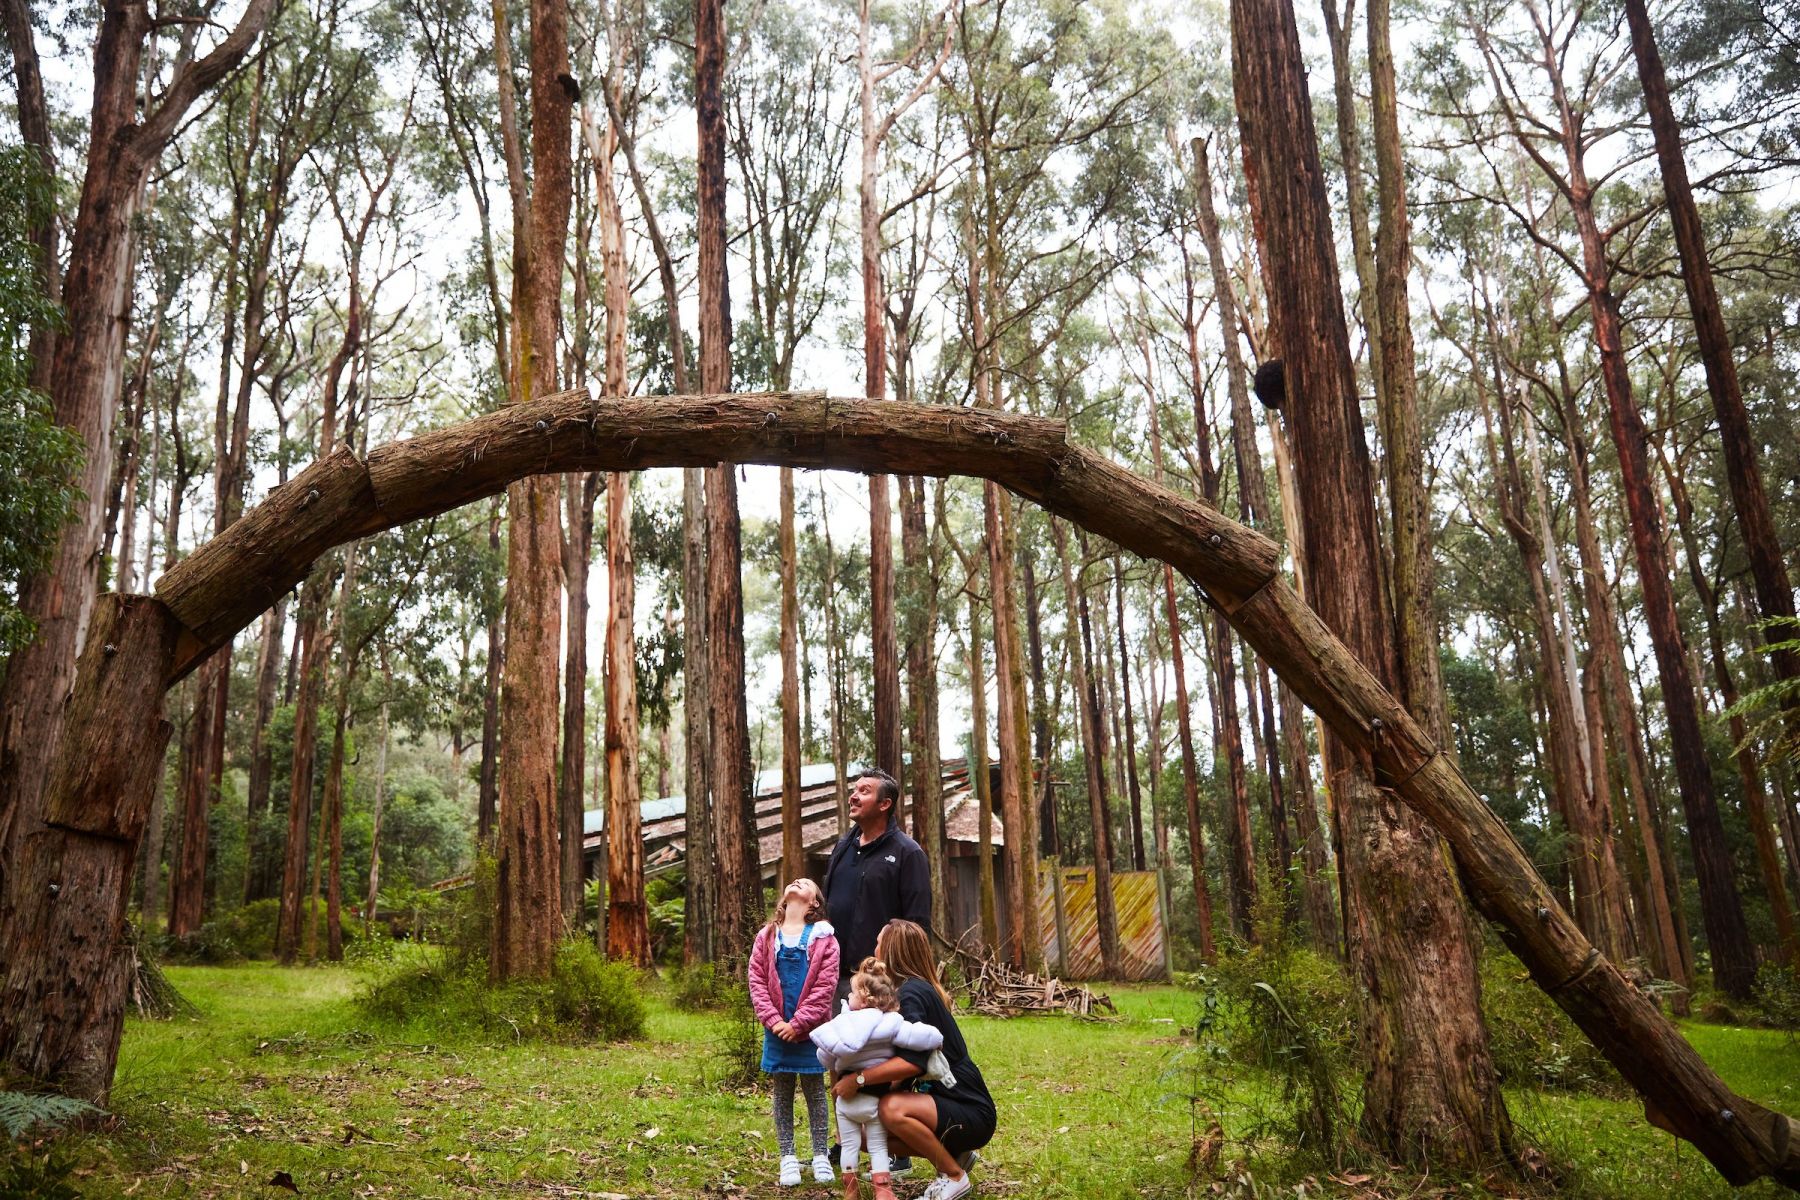 A family looks at a natural artwork in the forest